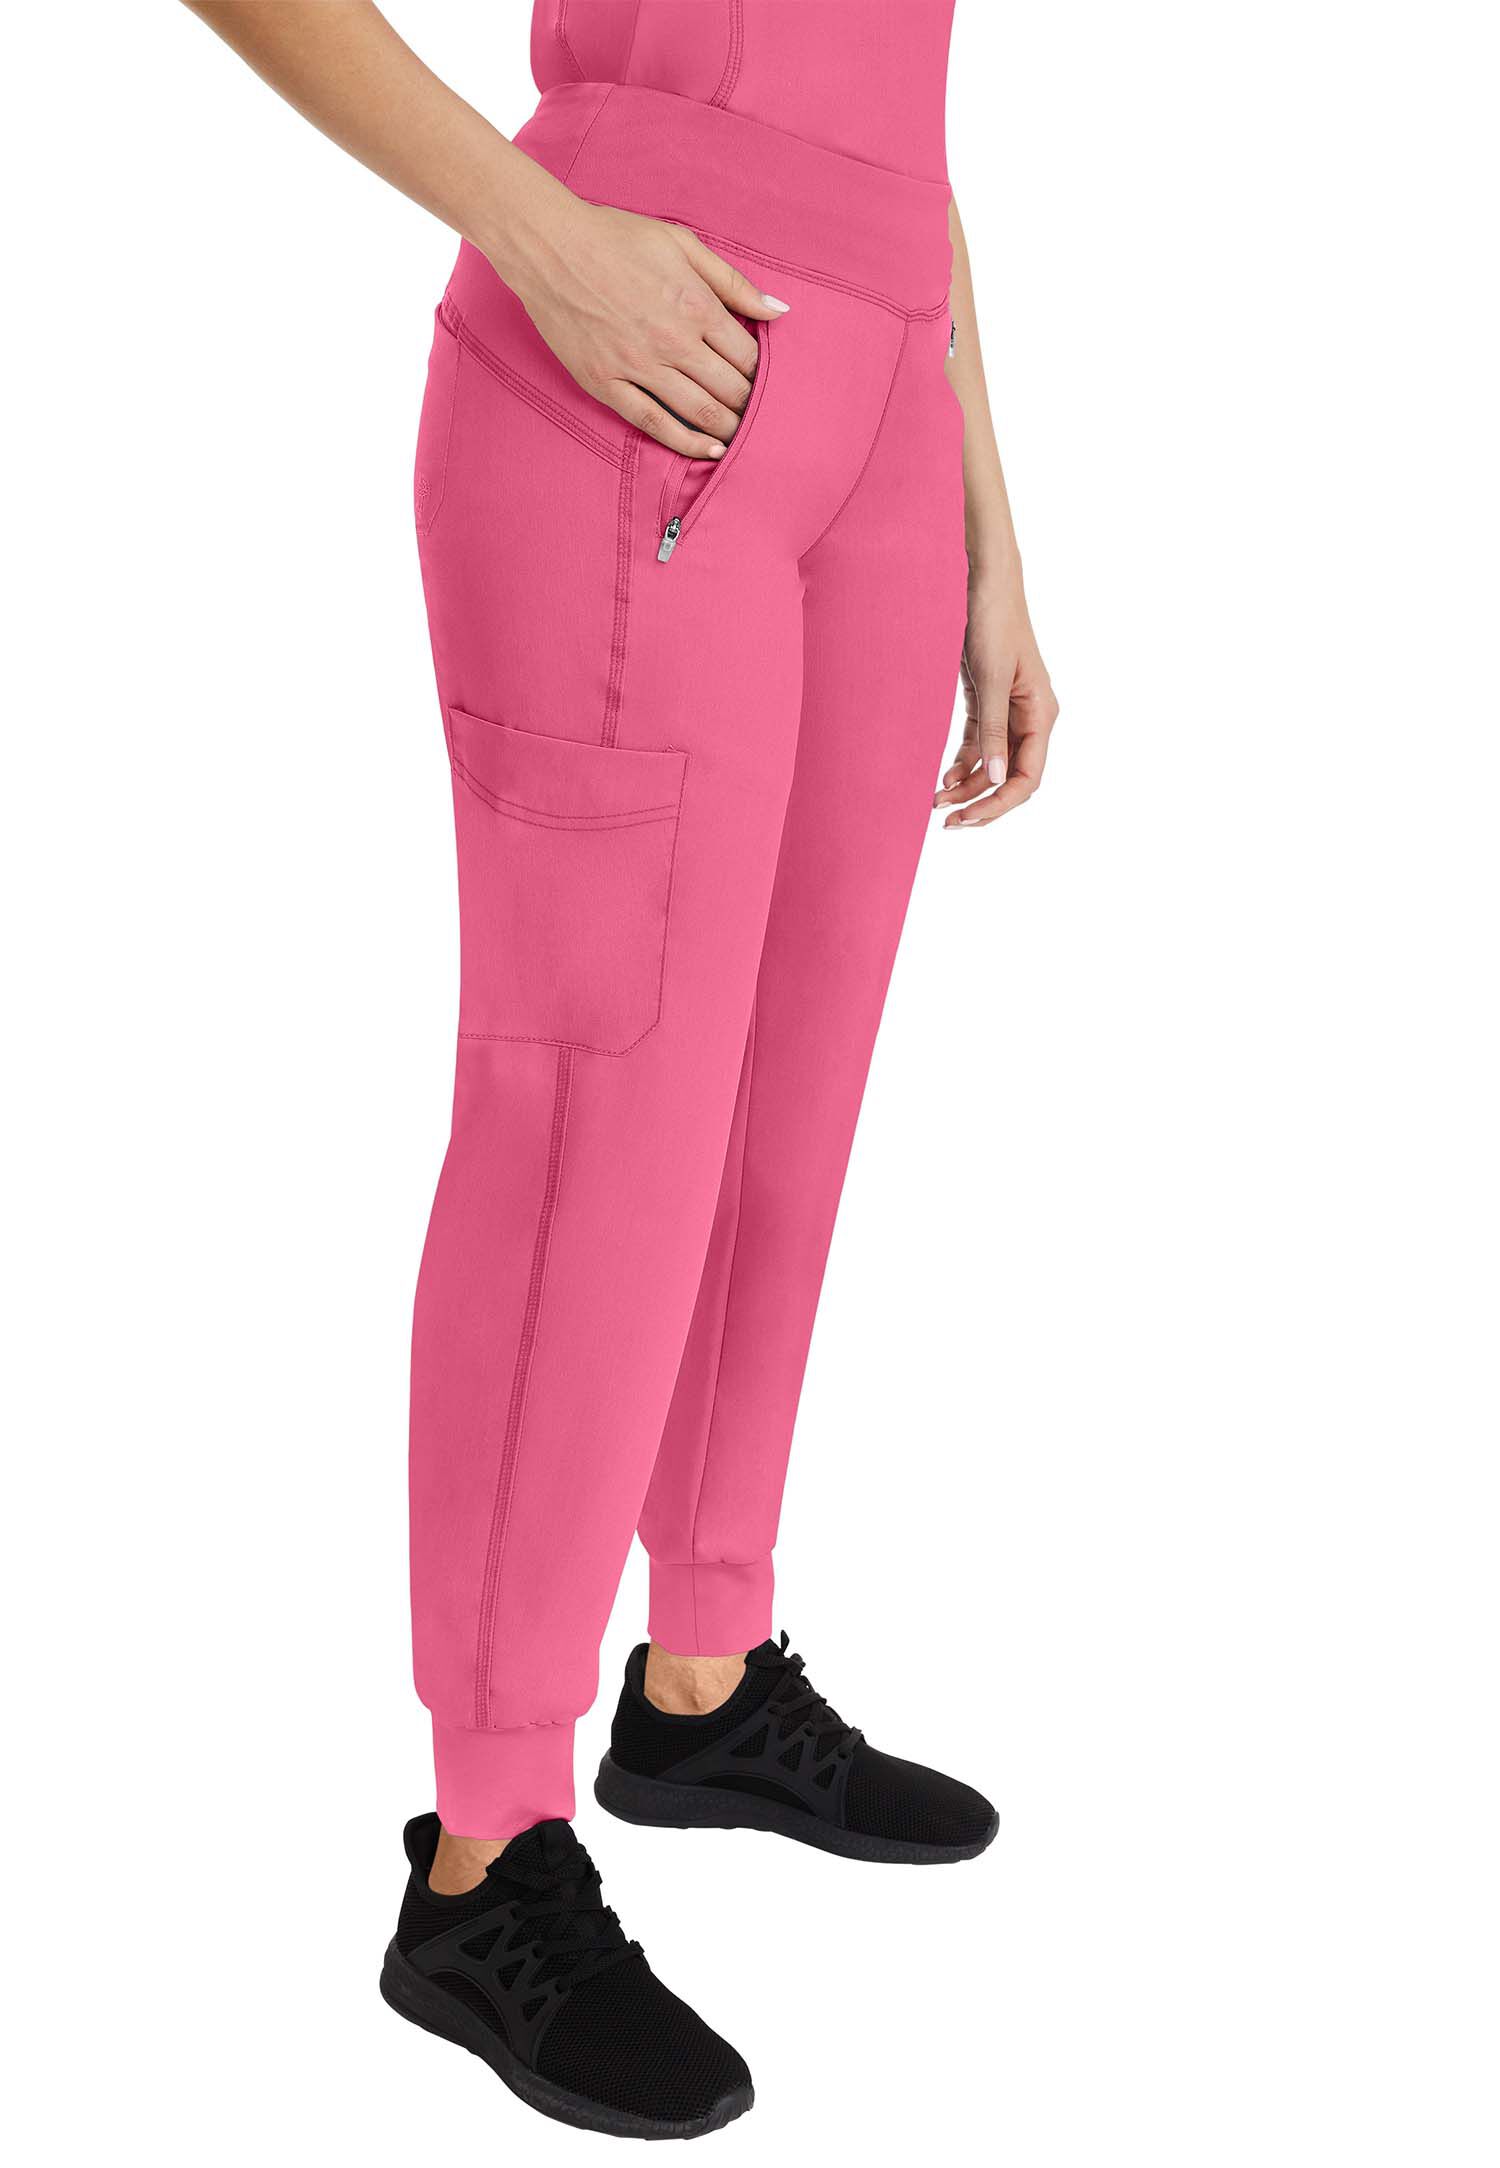 Tara Lifestyle Regular Fit Women Red Trousers - Buy Tara Lifestyle Regular  Fit Women Red Trousers Online at Best Prices in India | Flipkart.com